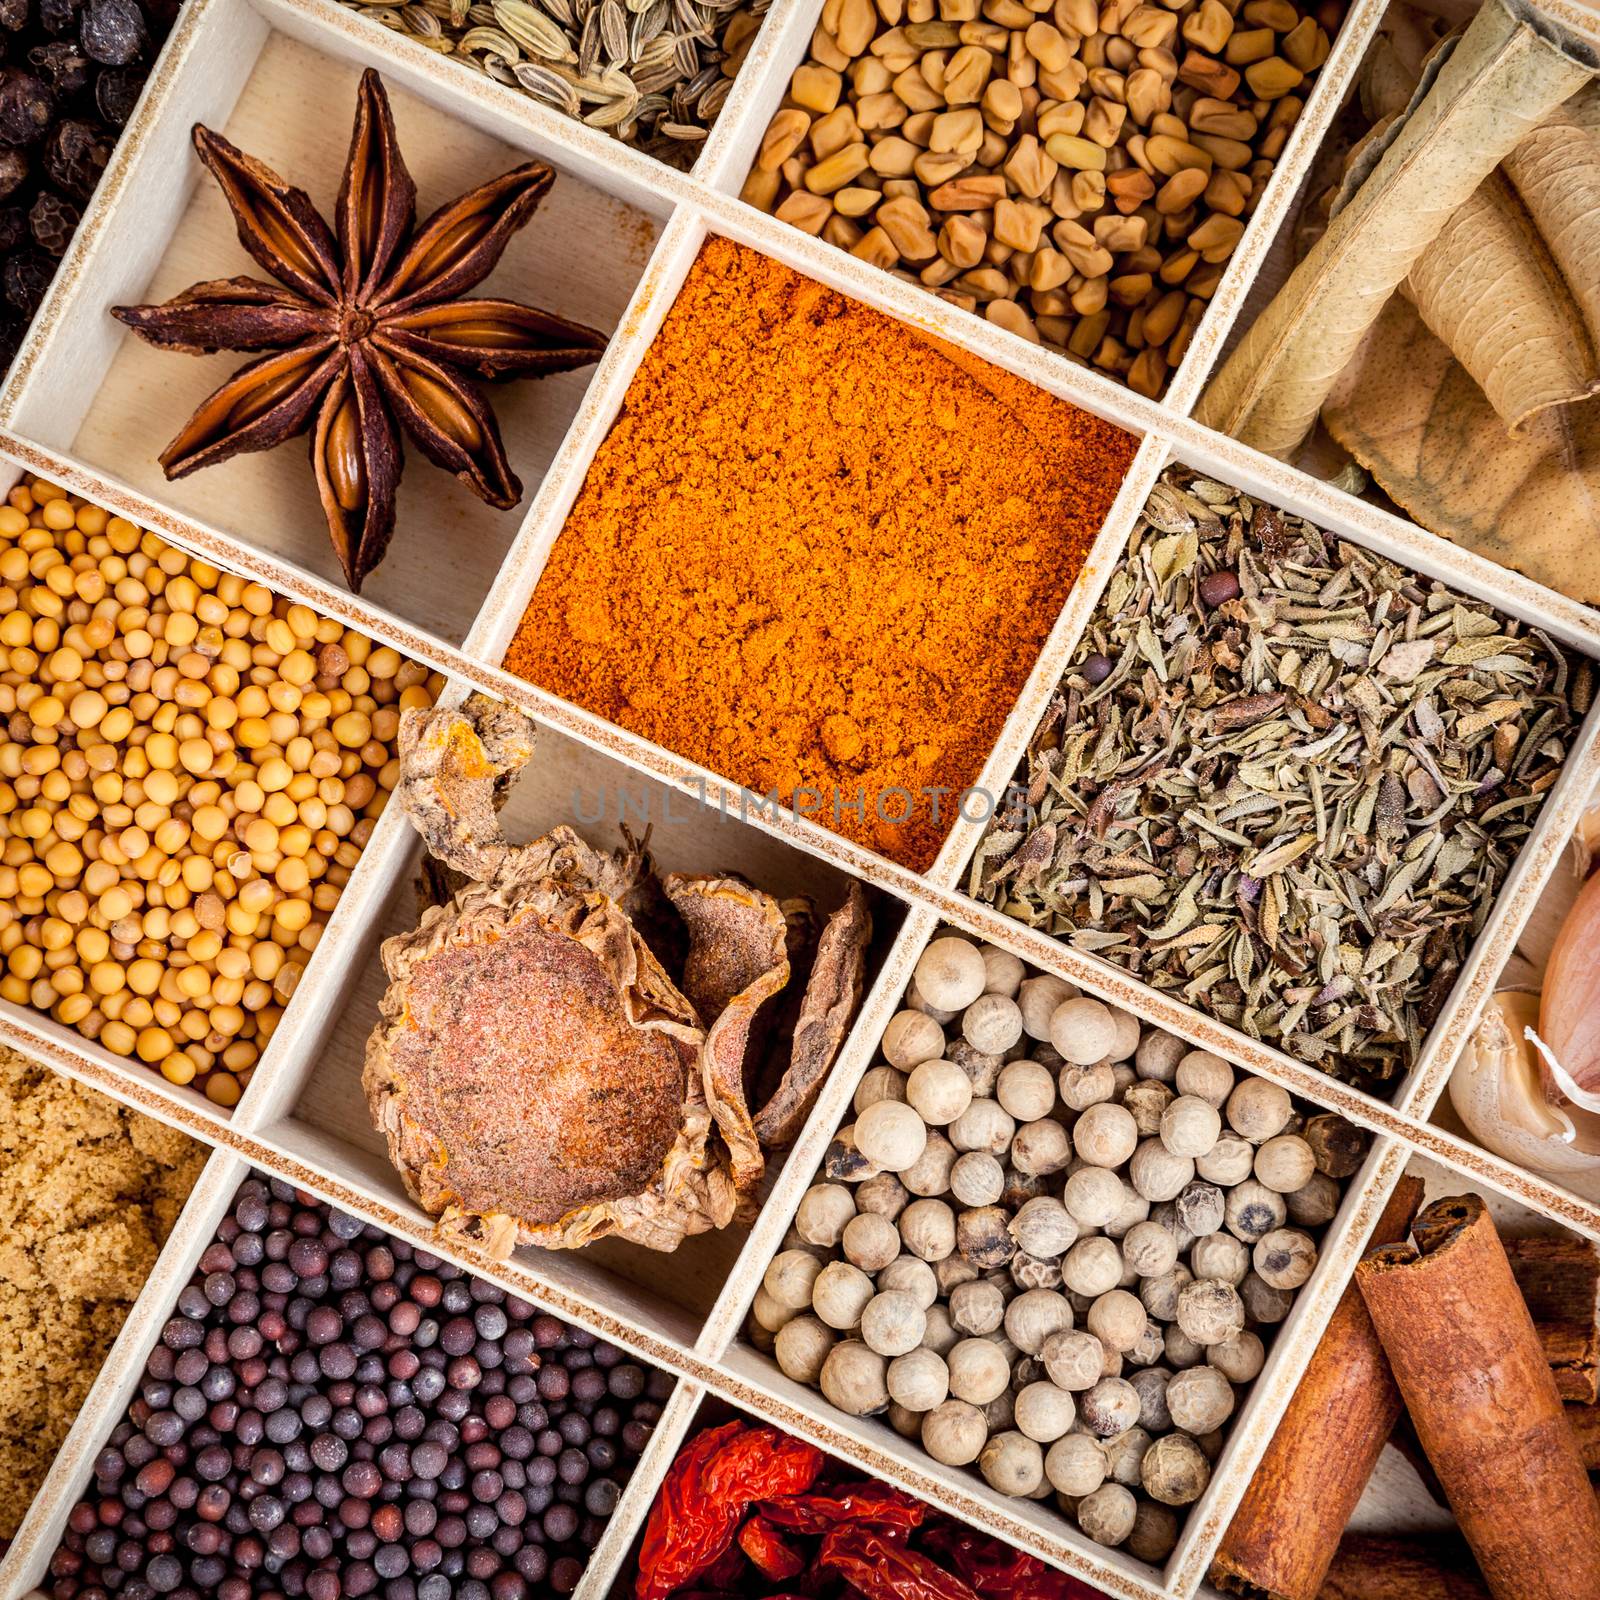 Assortment of spices food cooking ingredients in wooden box set up on wooden table.